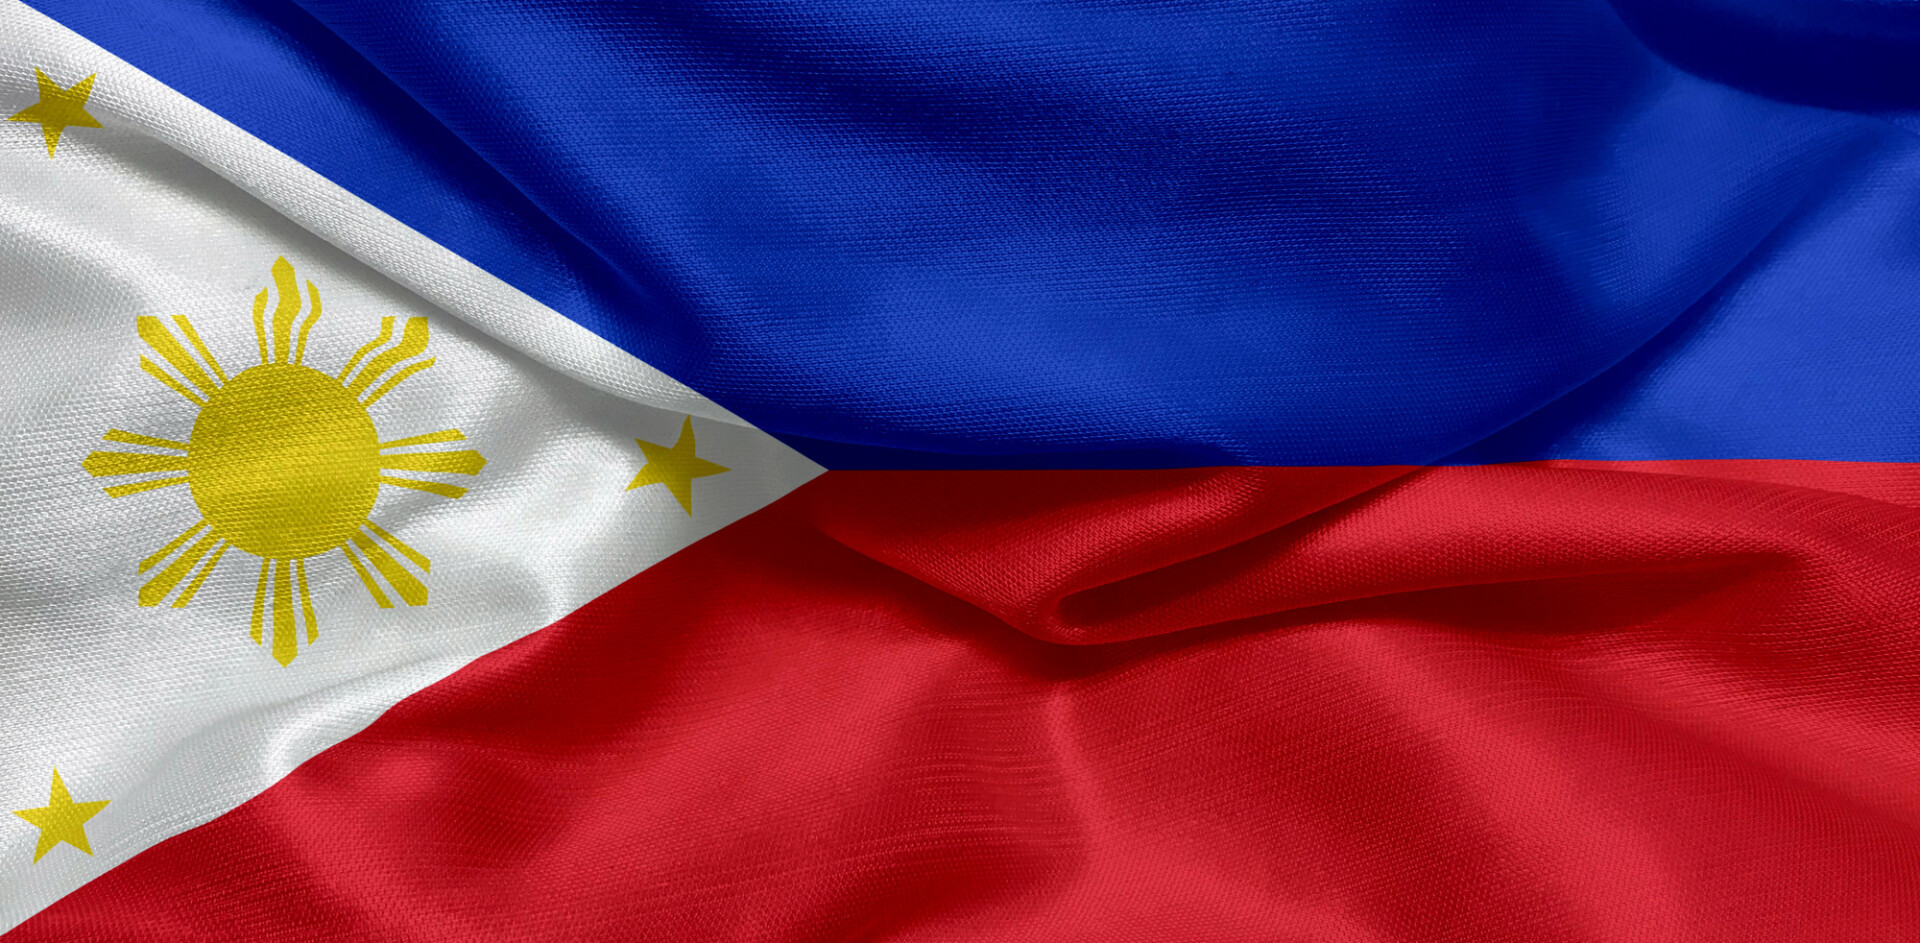 The national flag of the Philippines